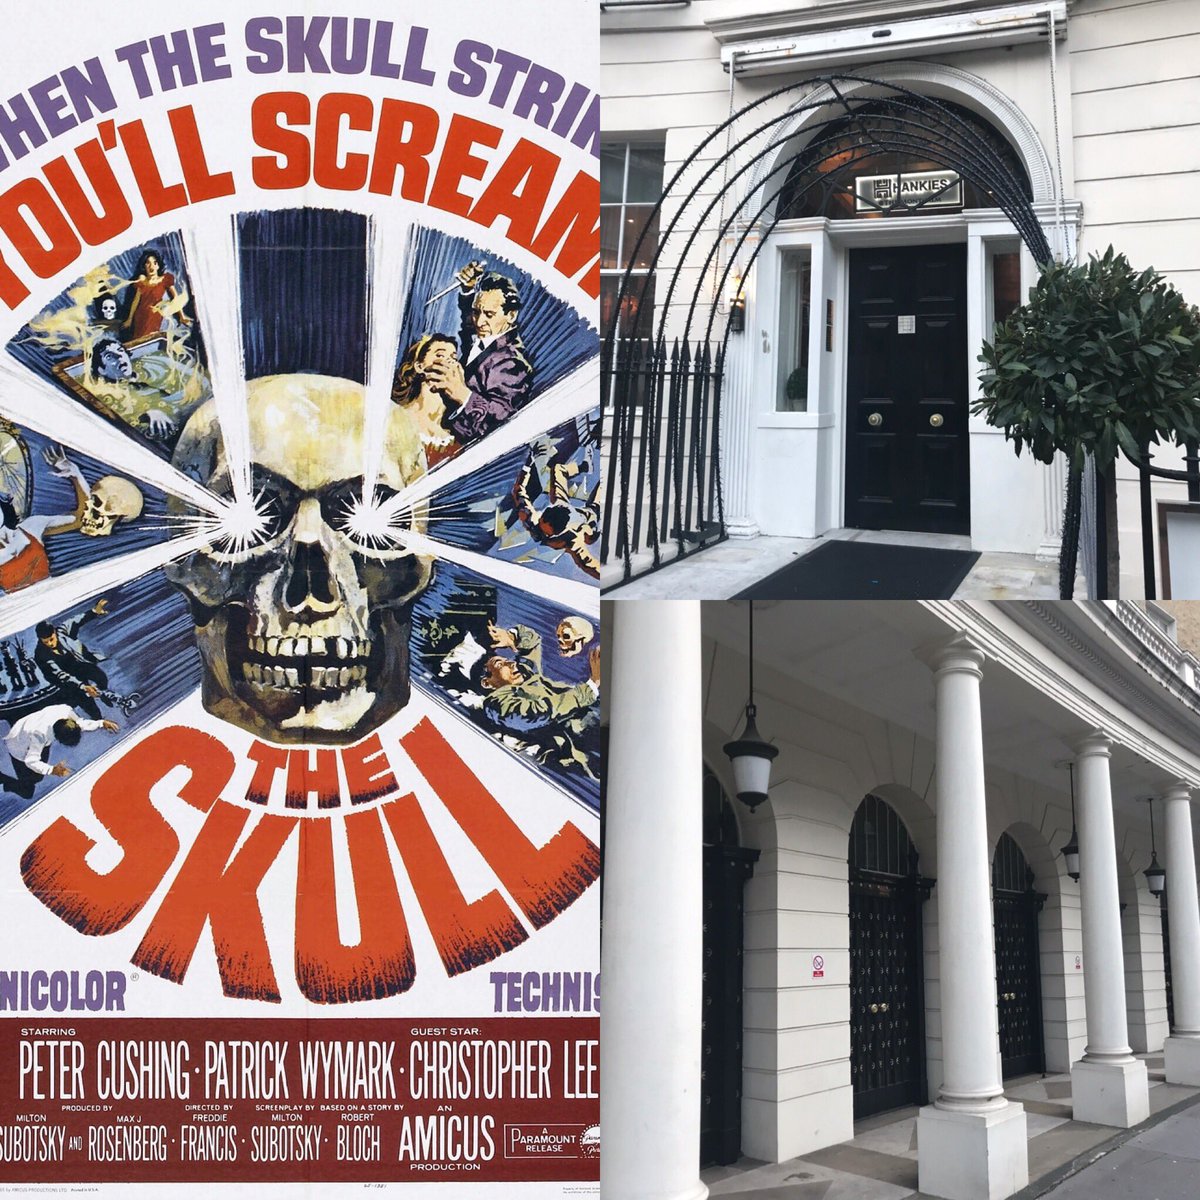 The only film location in #FreddieFrancis cracking good Amicus production #TheSkull (1965). Stunning Georgian crescent Great Cumberland Place, Marble Arch. The #PeterCushing character’s house is now a restaurant. Iron work/railings & lamps all still recognisable!